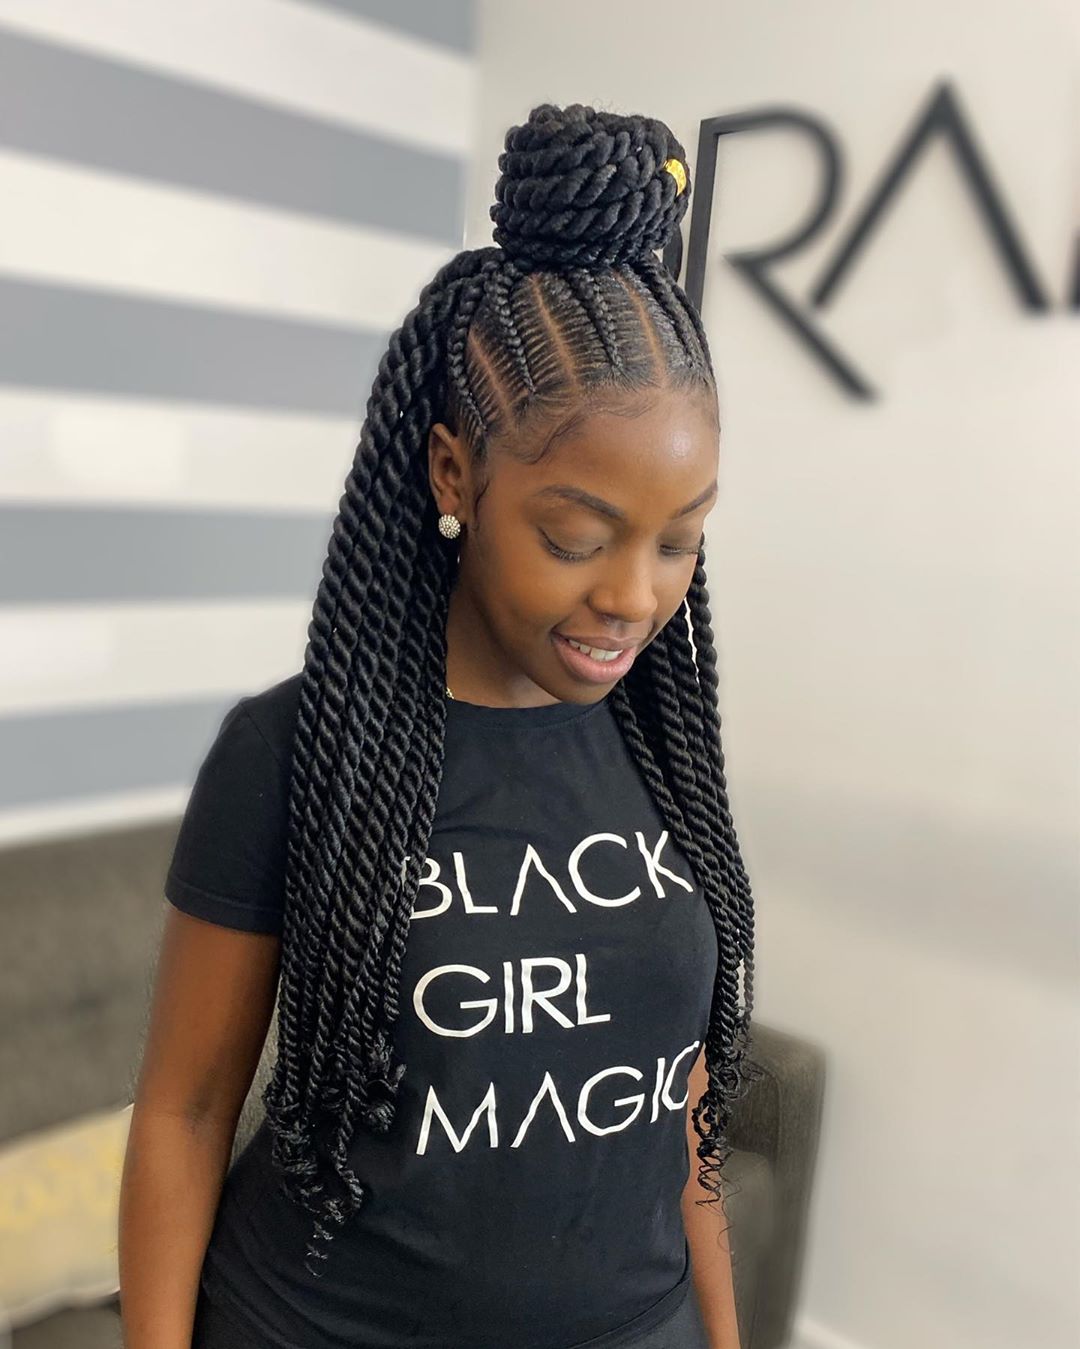 African Hair Braiding Styles Pictures 2020: Latest Styles For 2020 -  Fashion - Nigeria